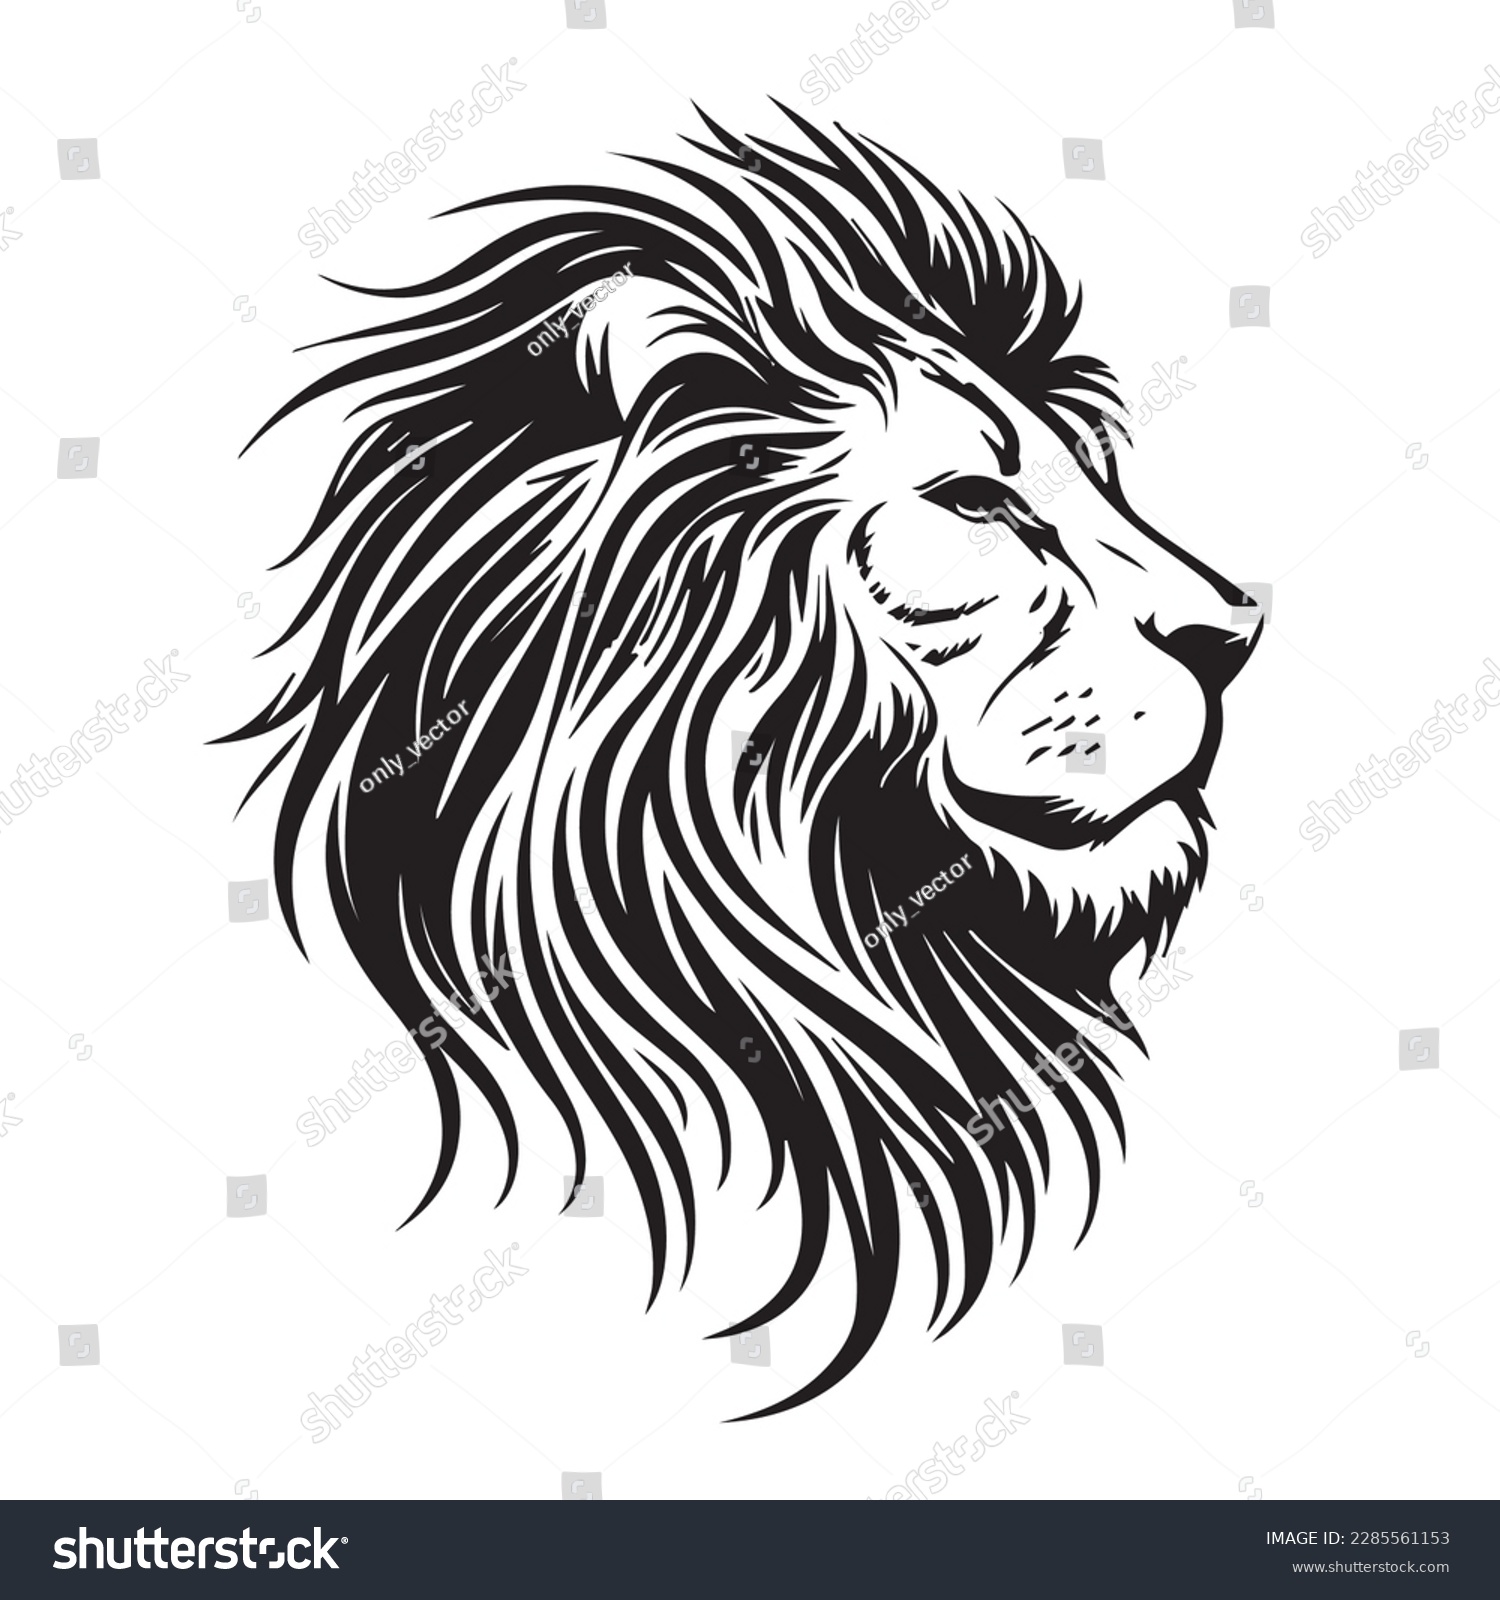 SVG of Vector image of a lion head on a white background. Silhouette svg illustration. svg